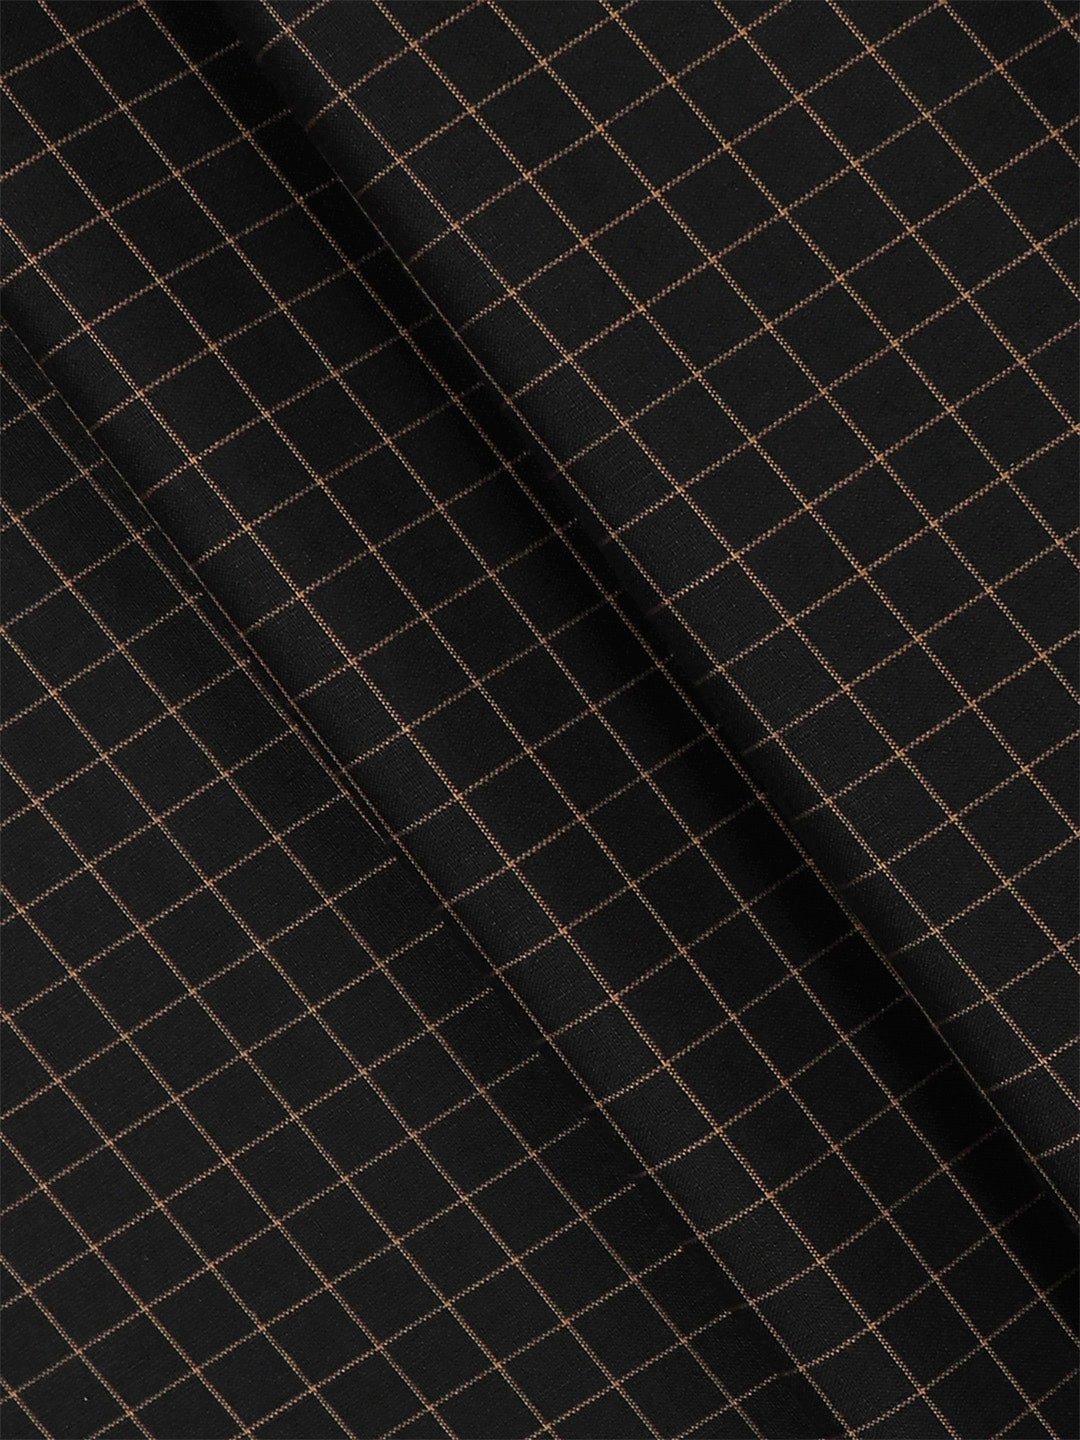 Cotton Black Color Check Shirt Fabric High Style